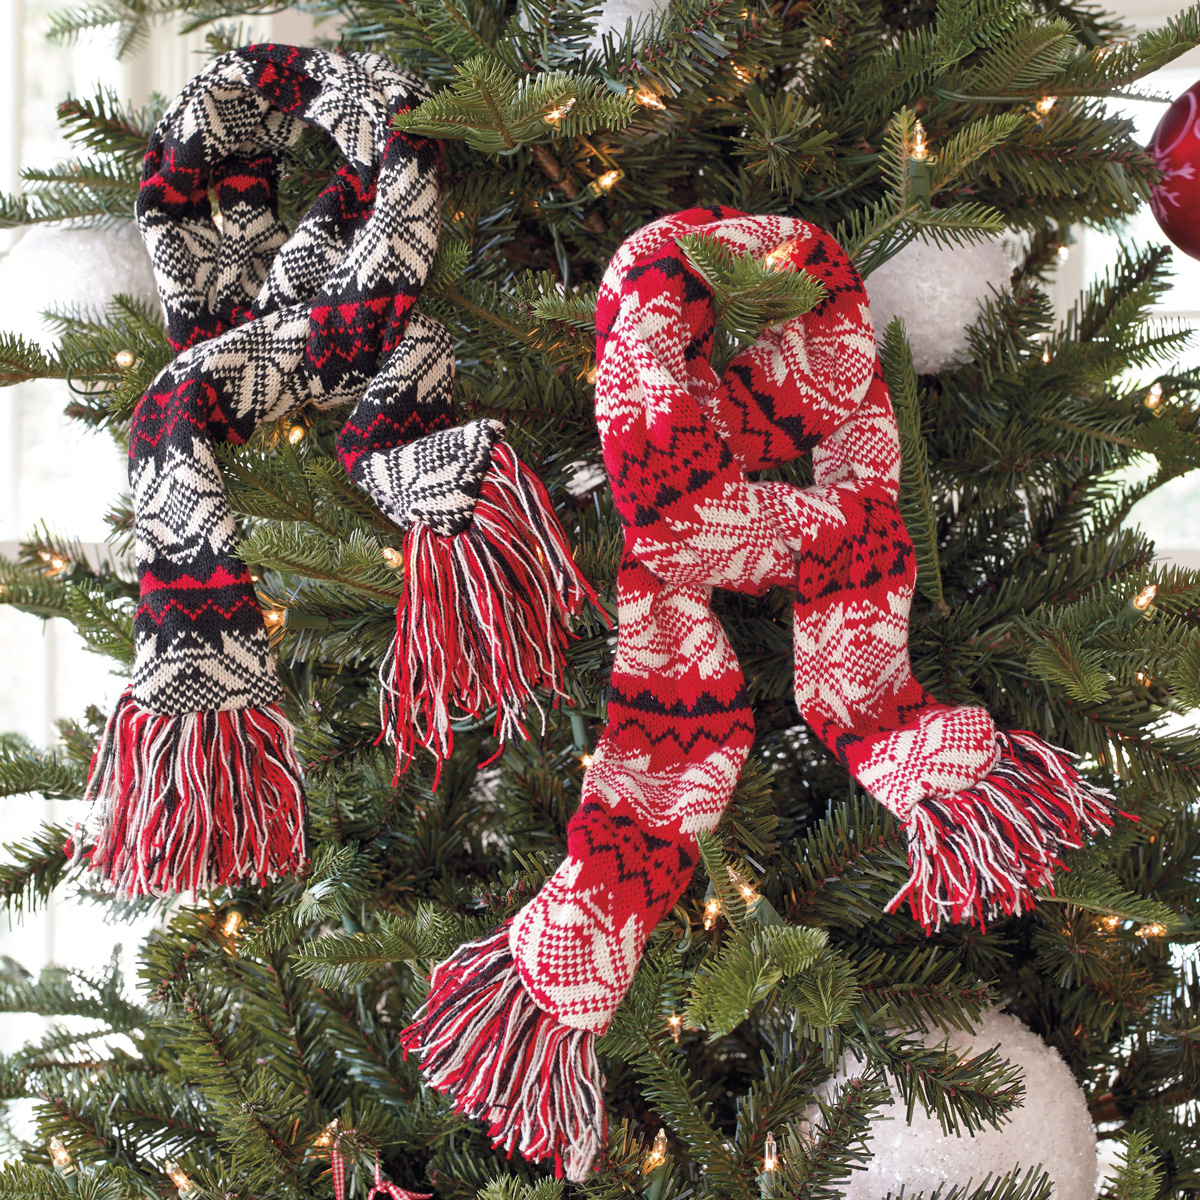 Knitted Scarf Ornaments - The Green Head